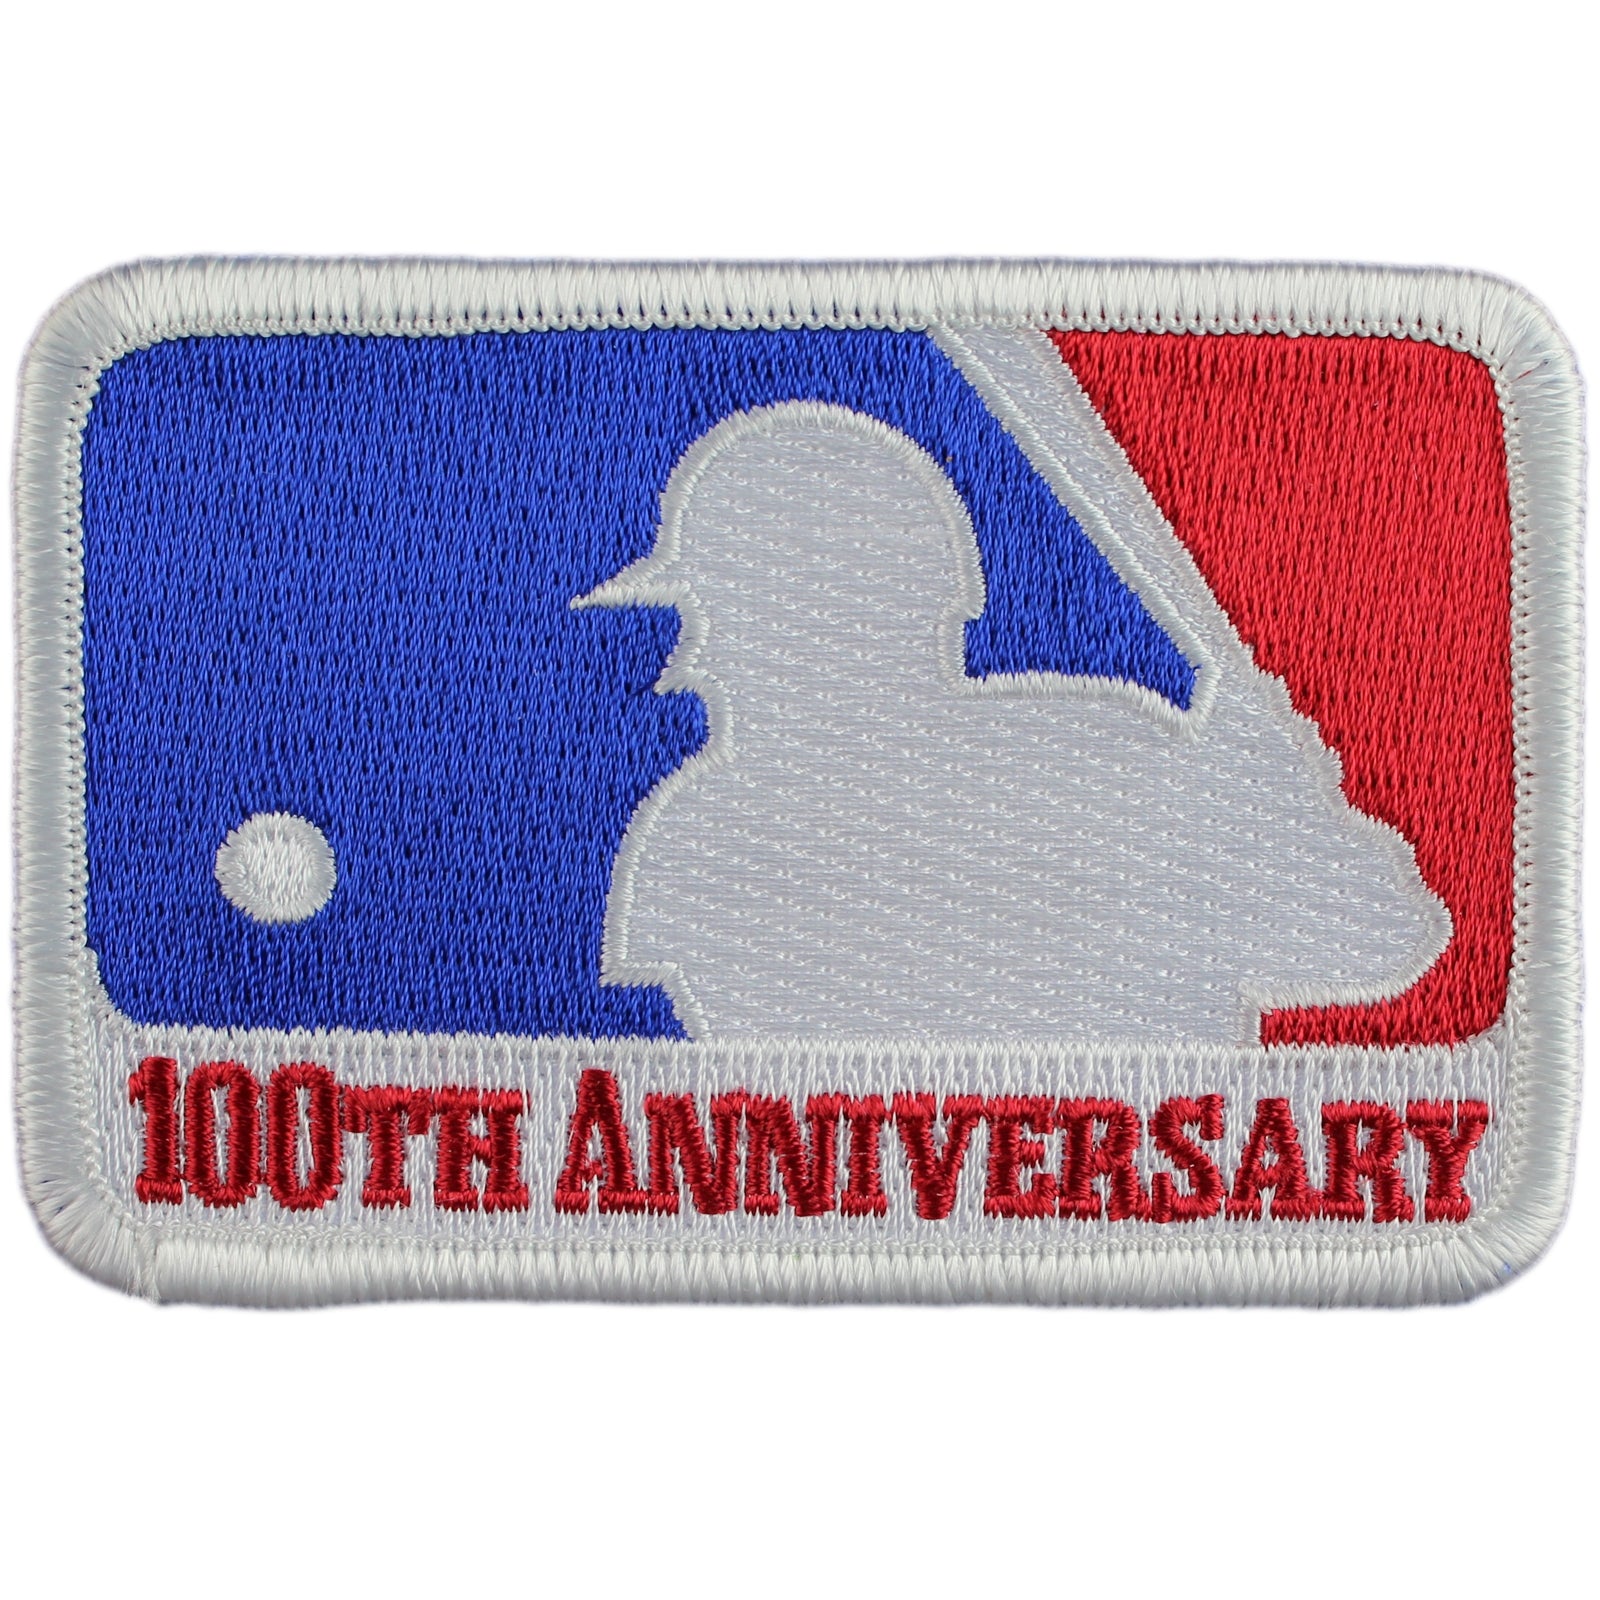 Major League Baseball - Patch - Back Patches